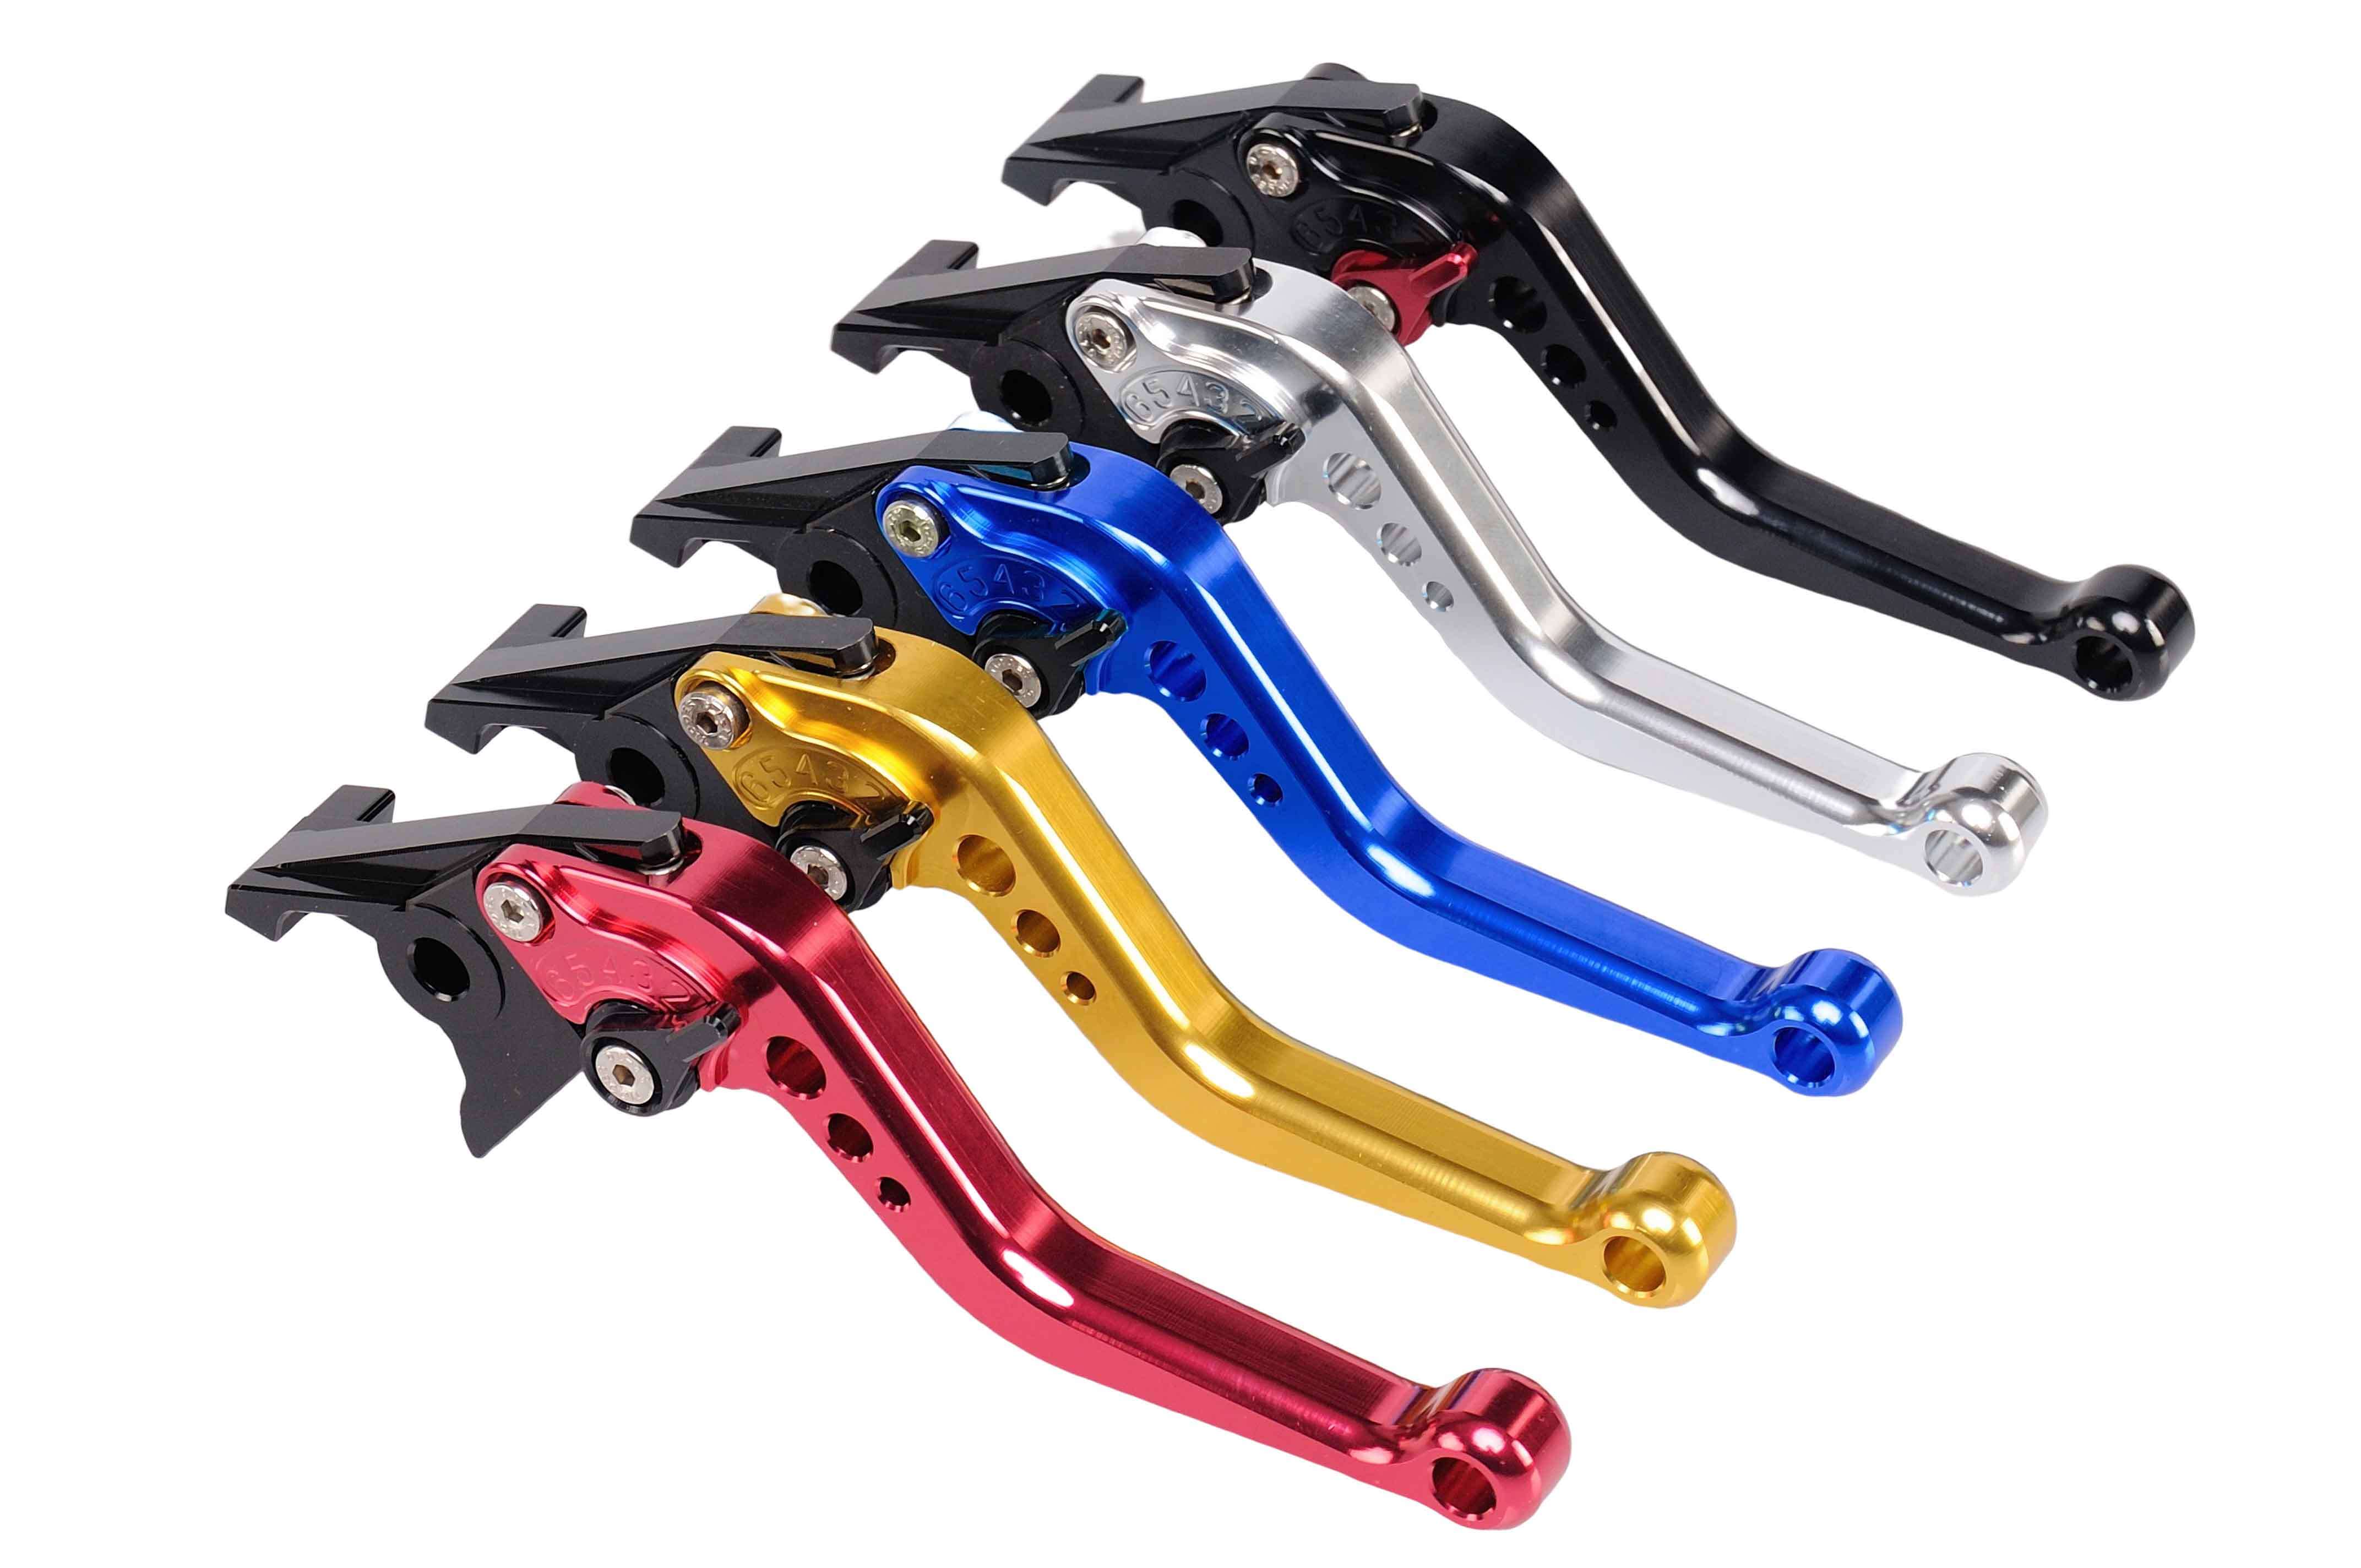 Brake Lever Brake Clutch Levers for Motorcycle Modification Accessories Racing Handlebar Brake Lever for Y a m a h a Handlebar Lever 